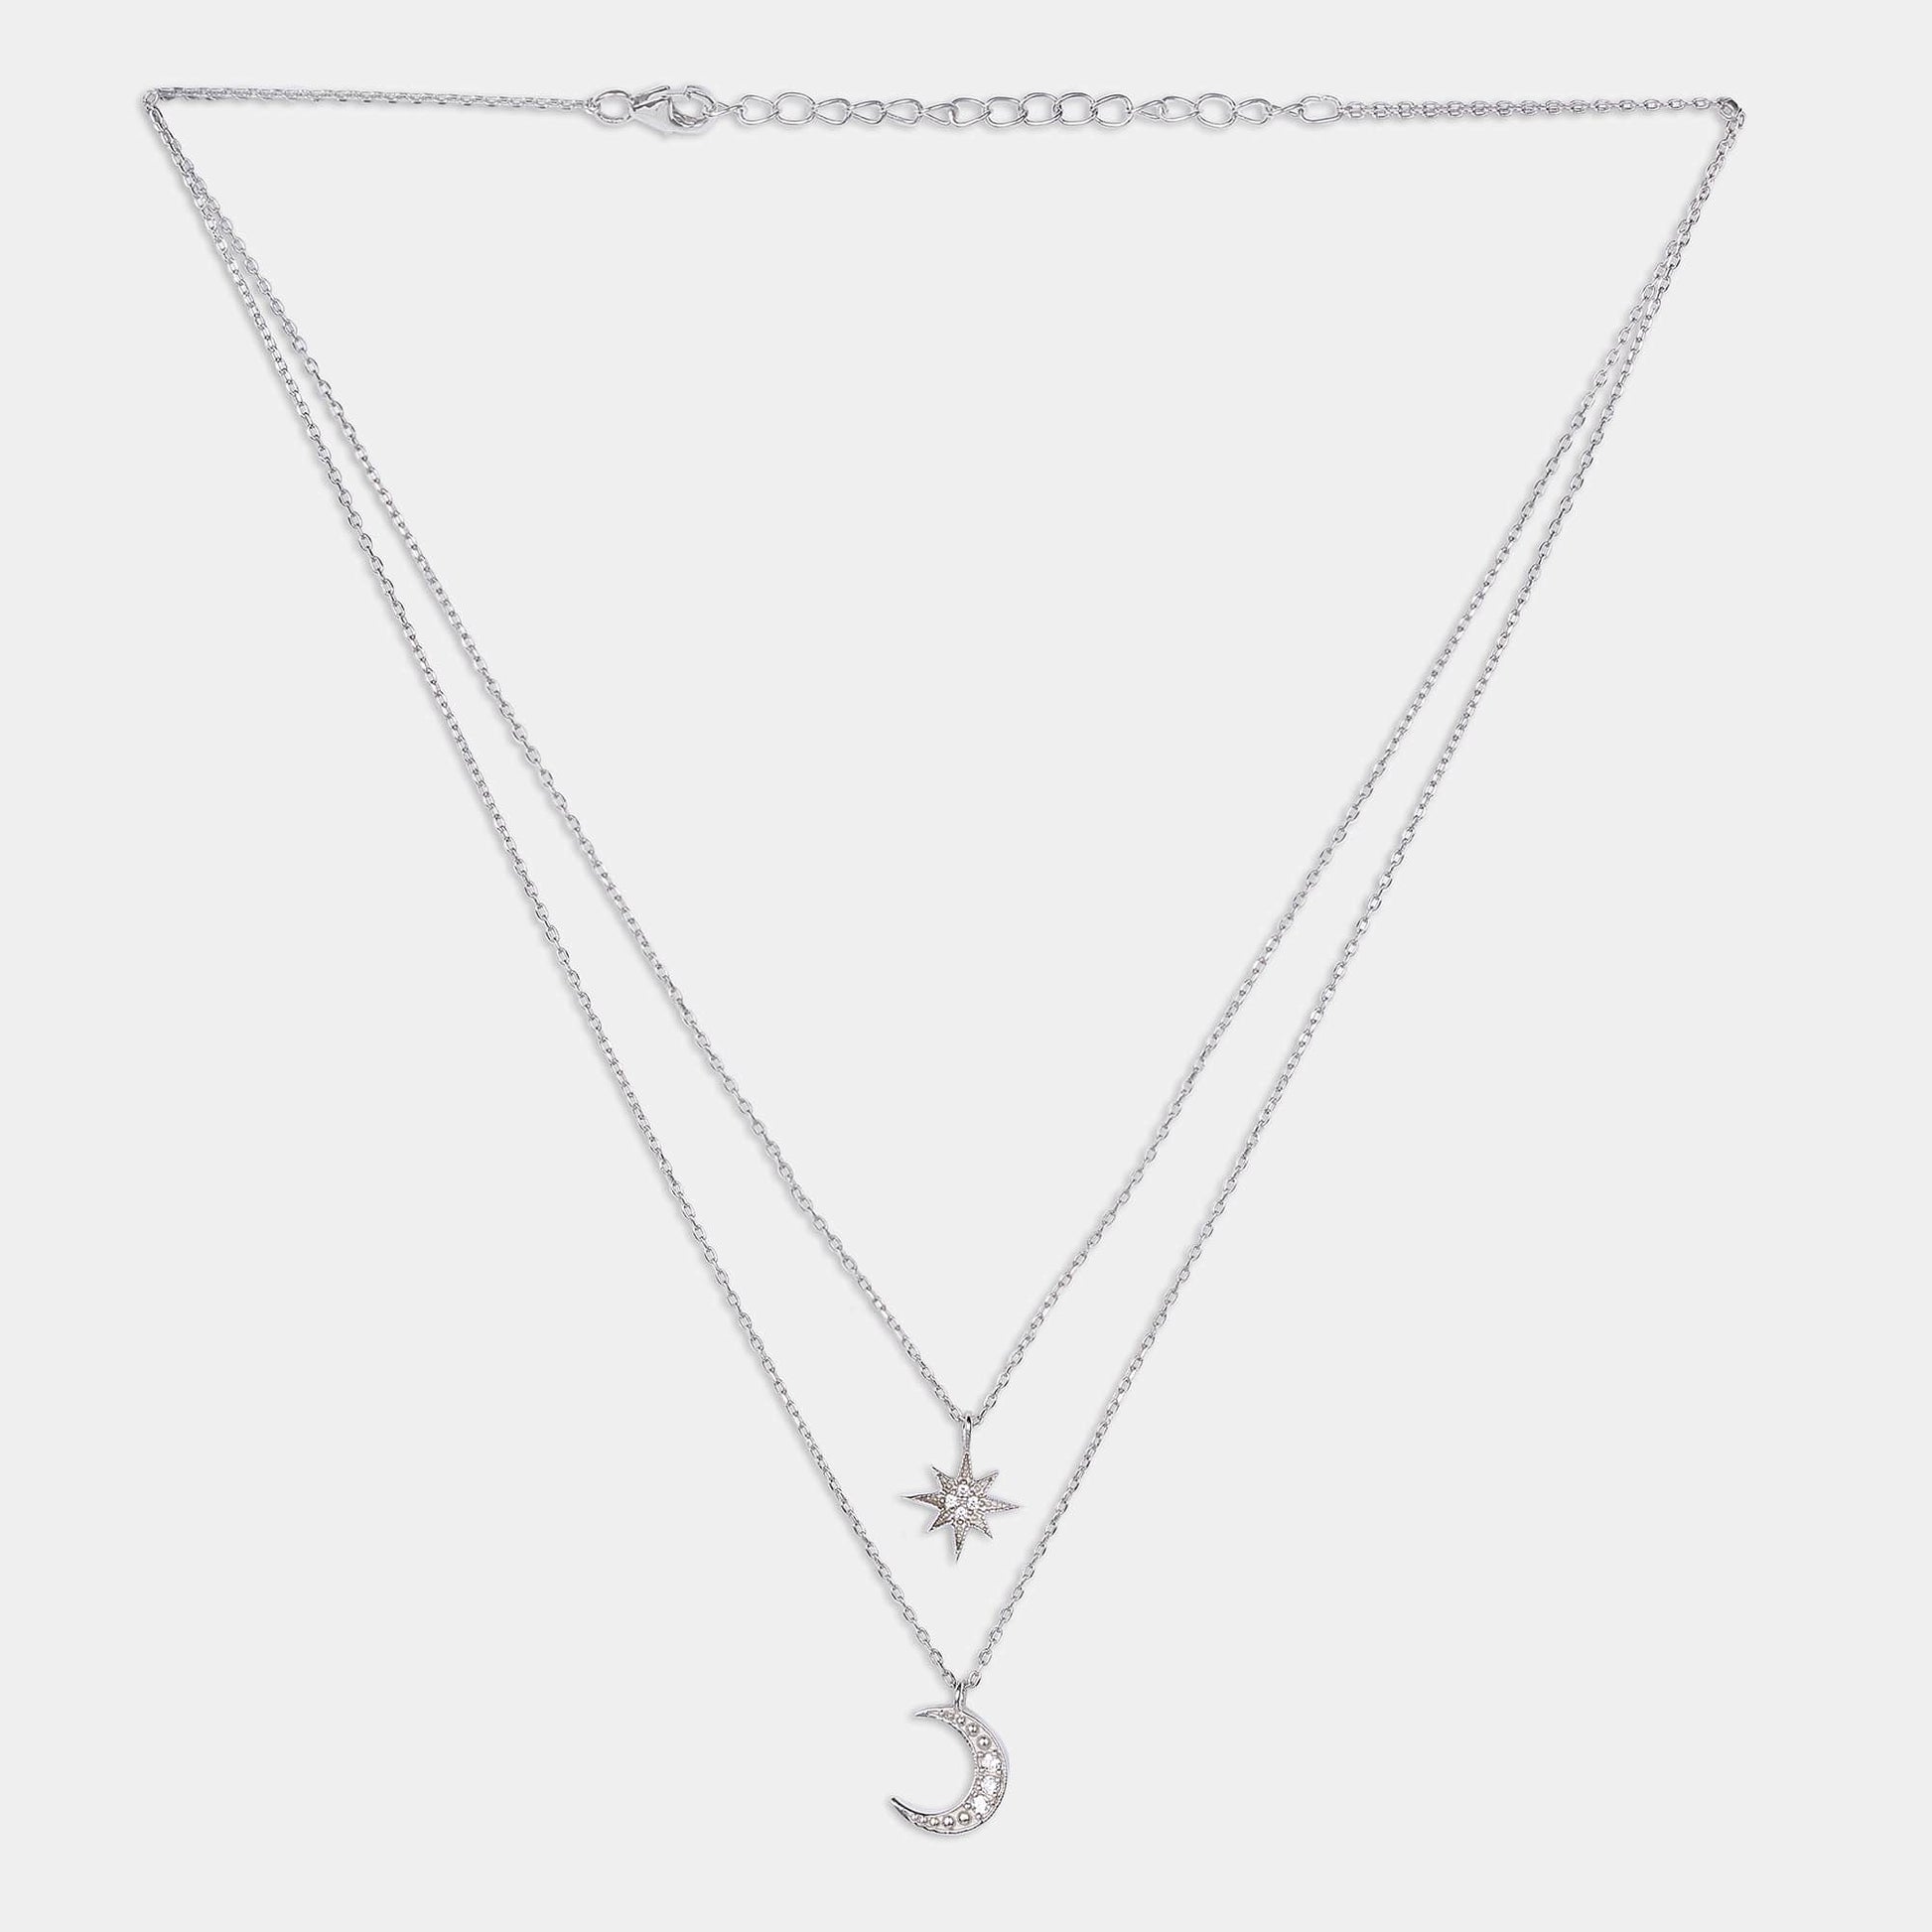 Discover our exquisite collection of sterling silver necklaces featuring a delicate moon pendant and a charming star pendant. Perfect for adding a touch of celestial elegance to any outfit.